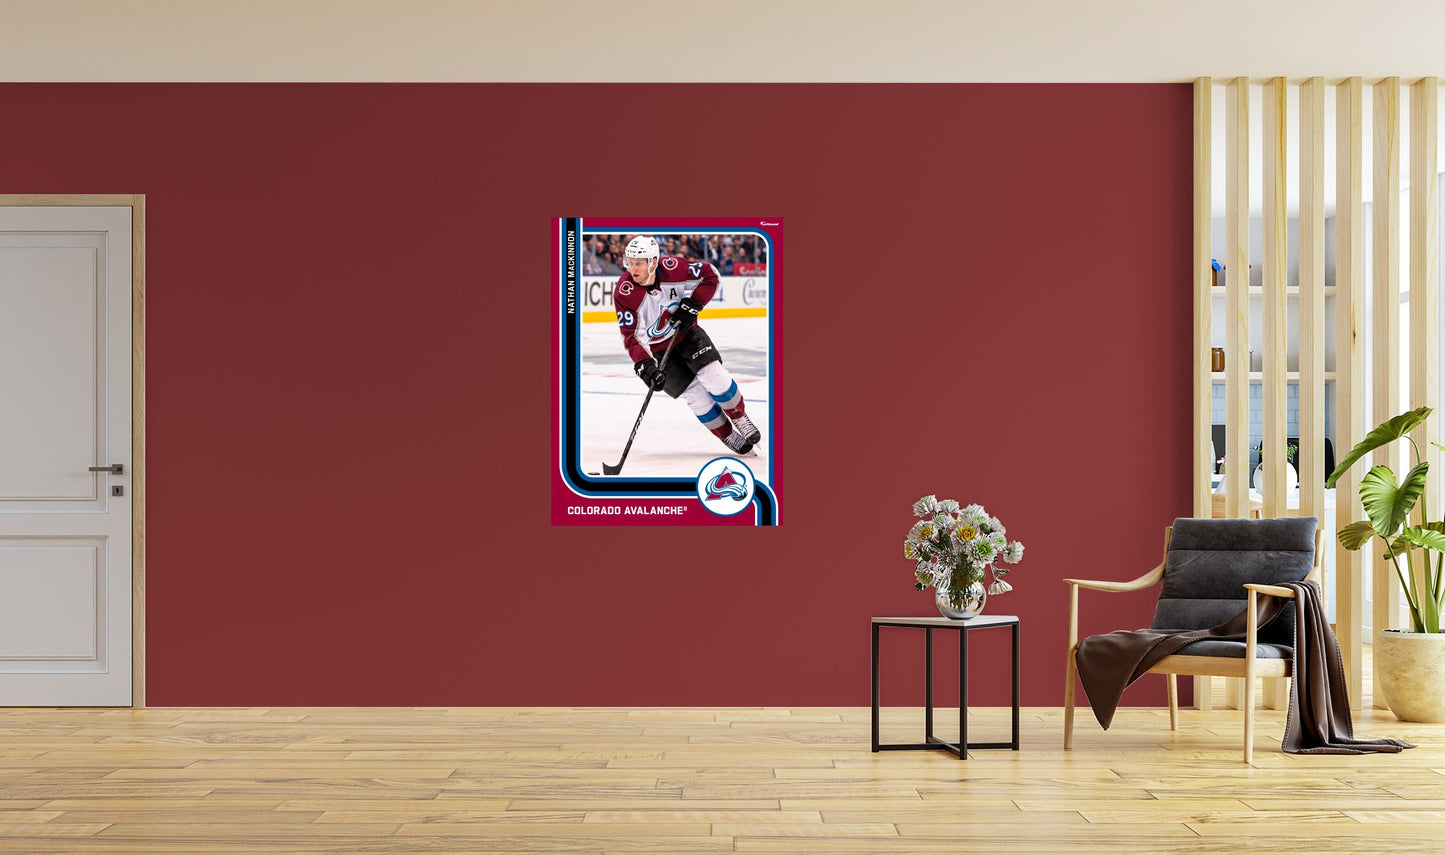 Colorado Avalanche: Nathan MacKinnon Poster - Officially Licensed NHL Removable Adhesive Decal